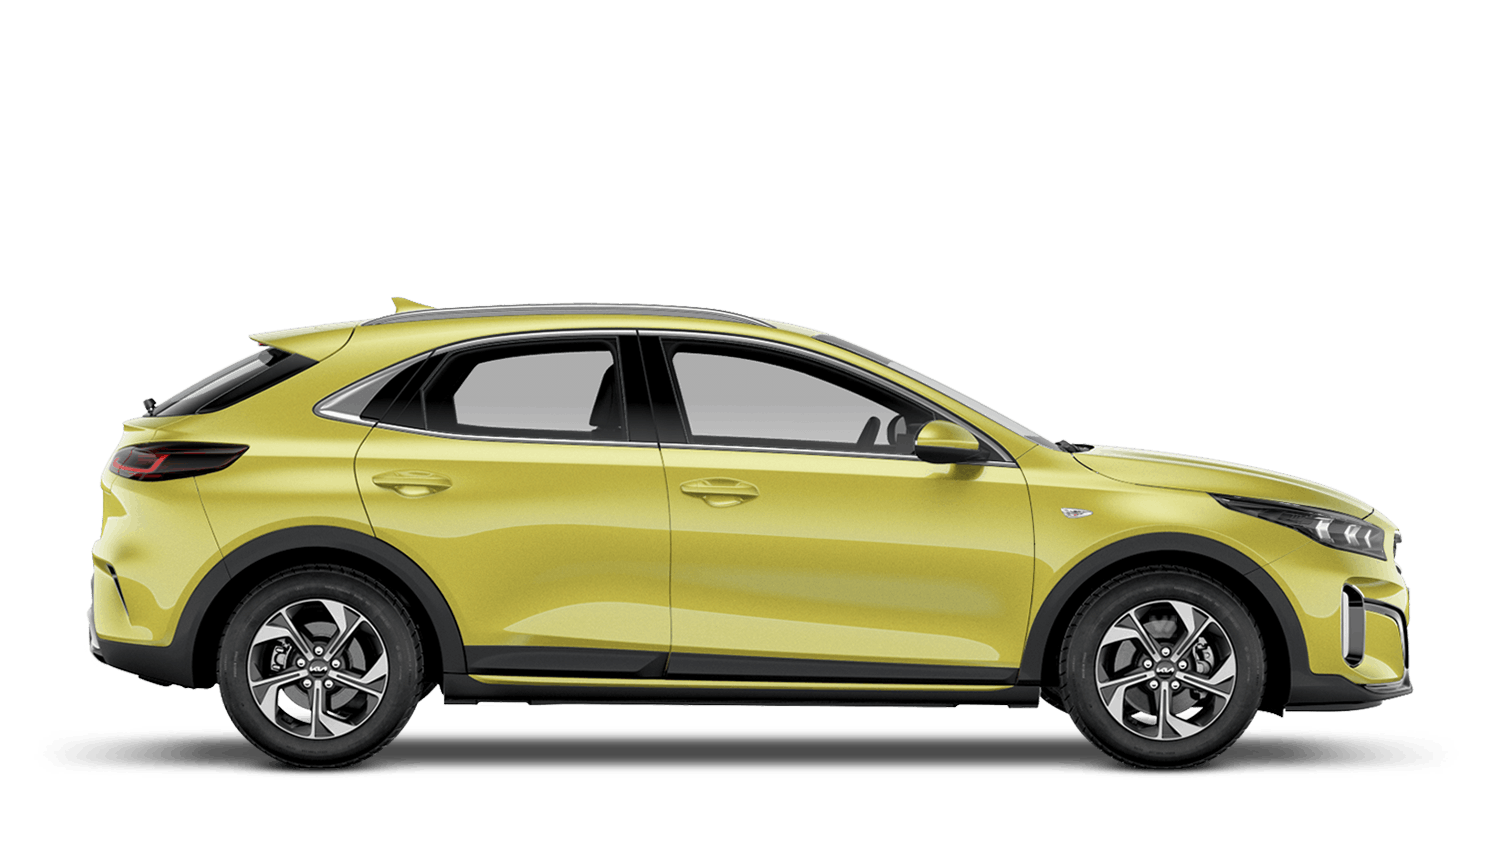 The new Kia XCeed. A Sporty Compact Crossover